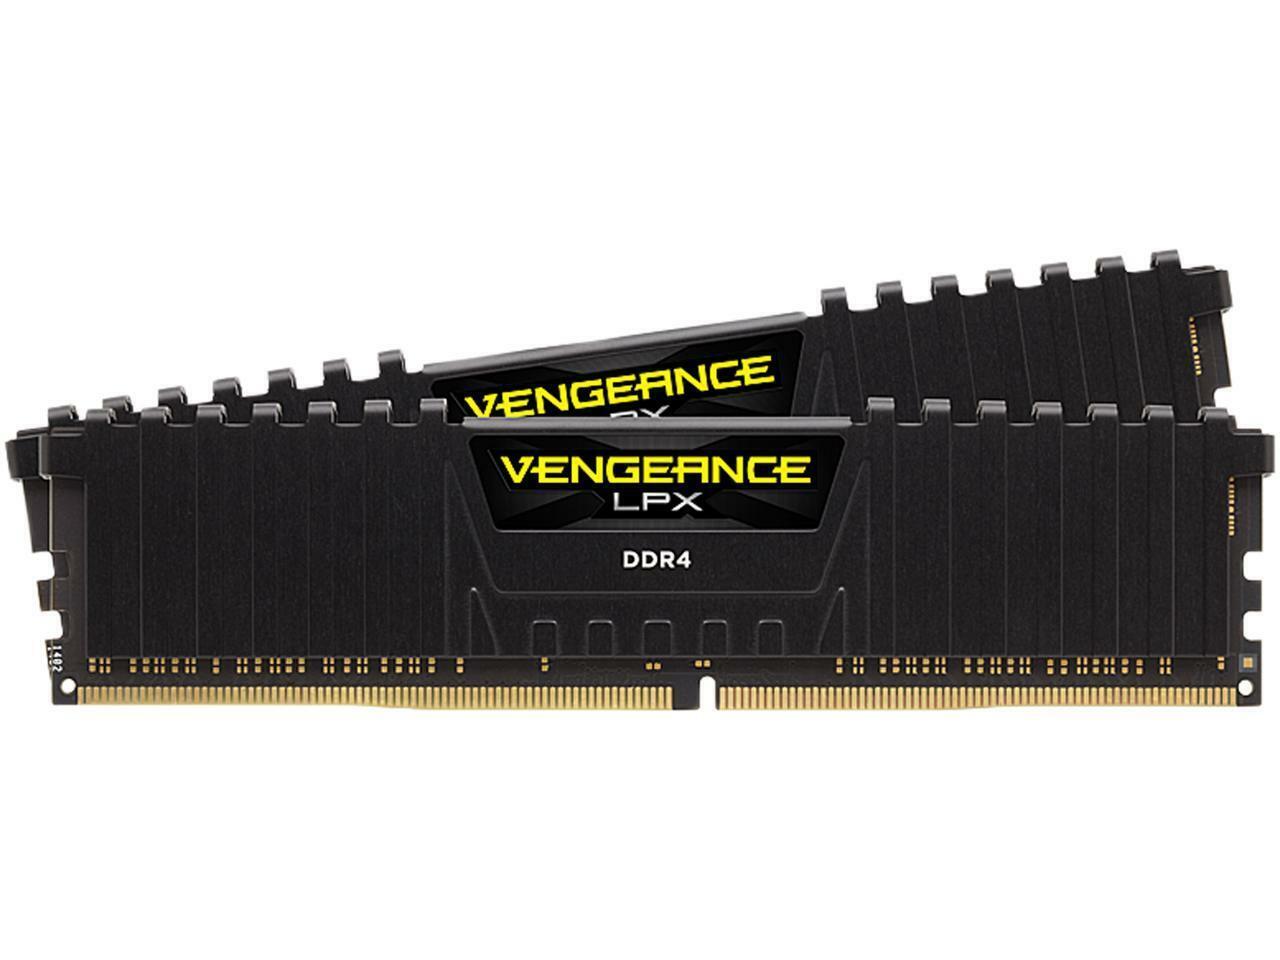 CORSAIR SALENEW very popular! Vengeance LPX 32GB 2 x 288-Pin 36 Special price for a limited time SDRAM DDR4 16GB